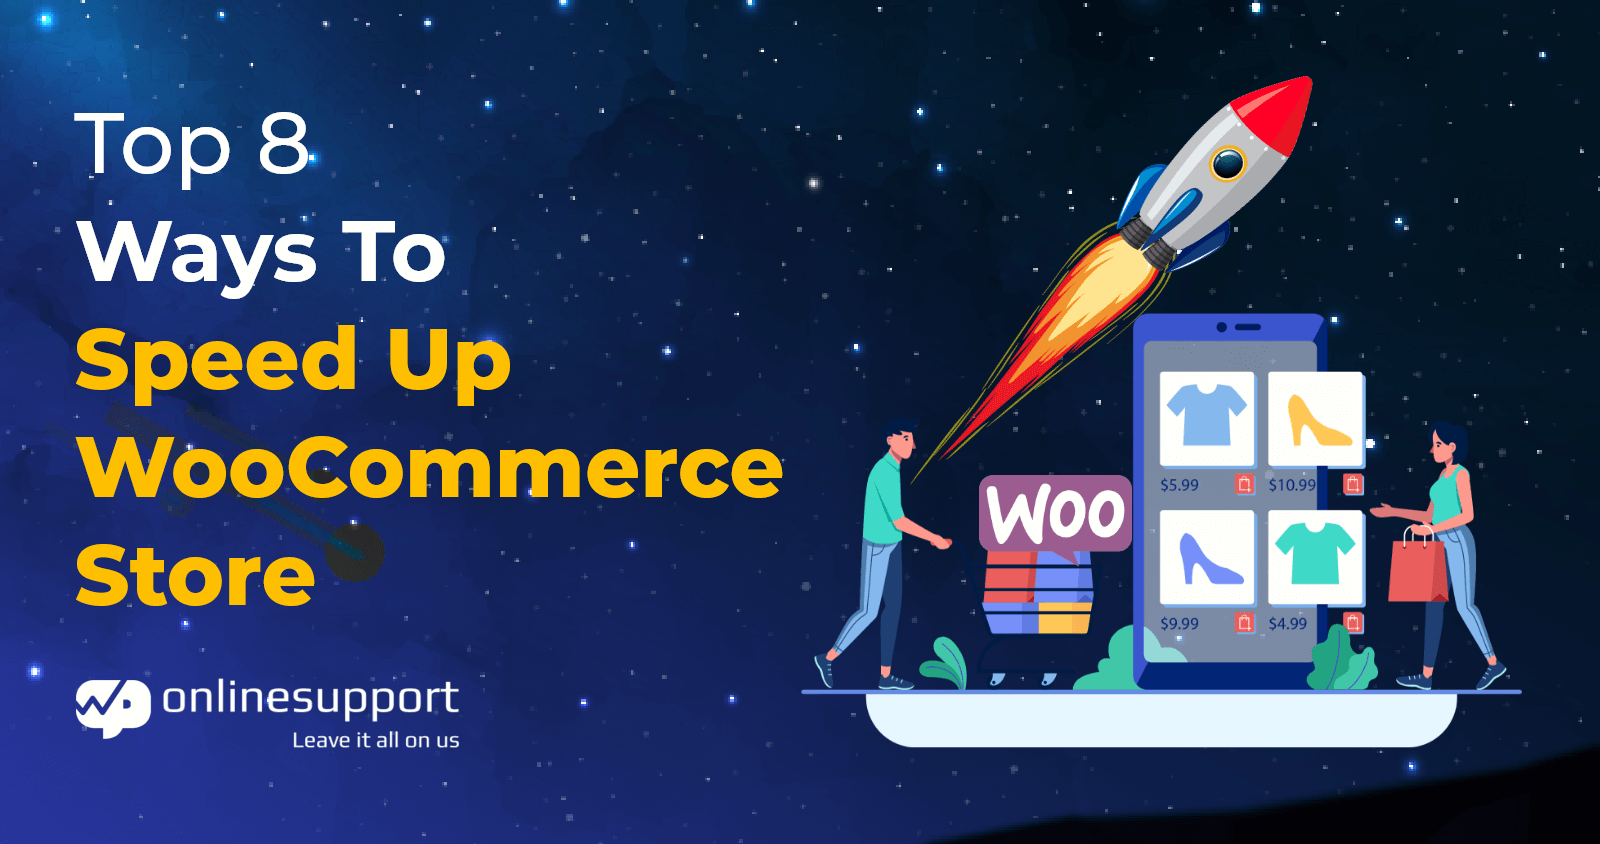 Top 8 Ways To Speed Up WooCommerce Store